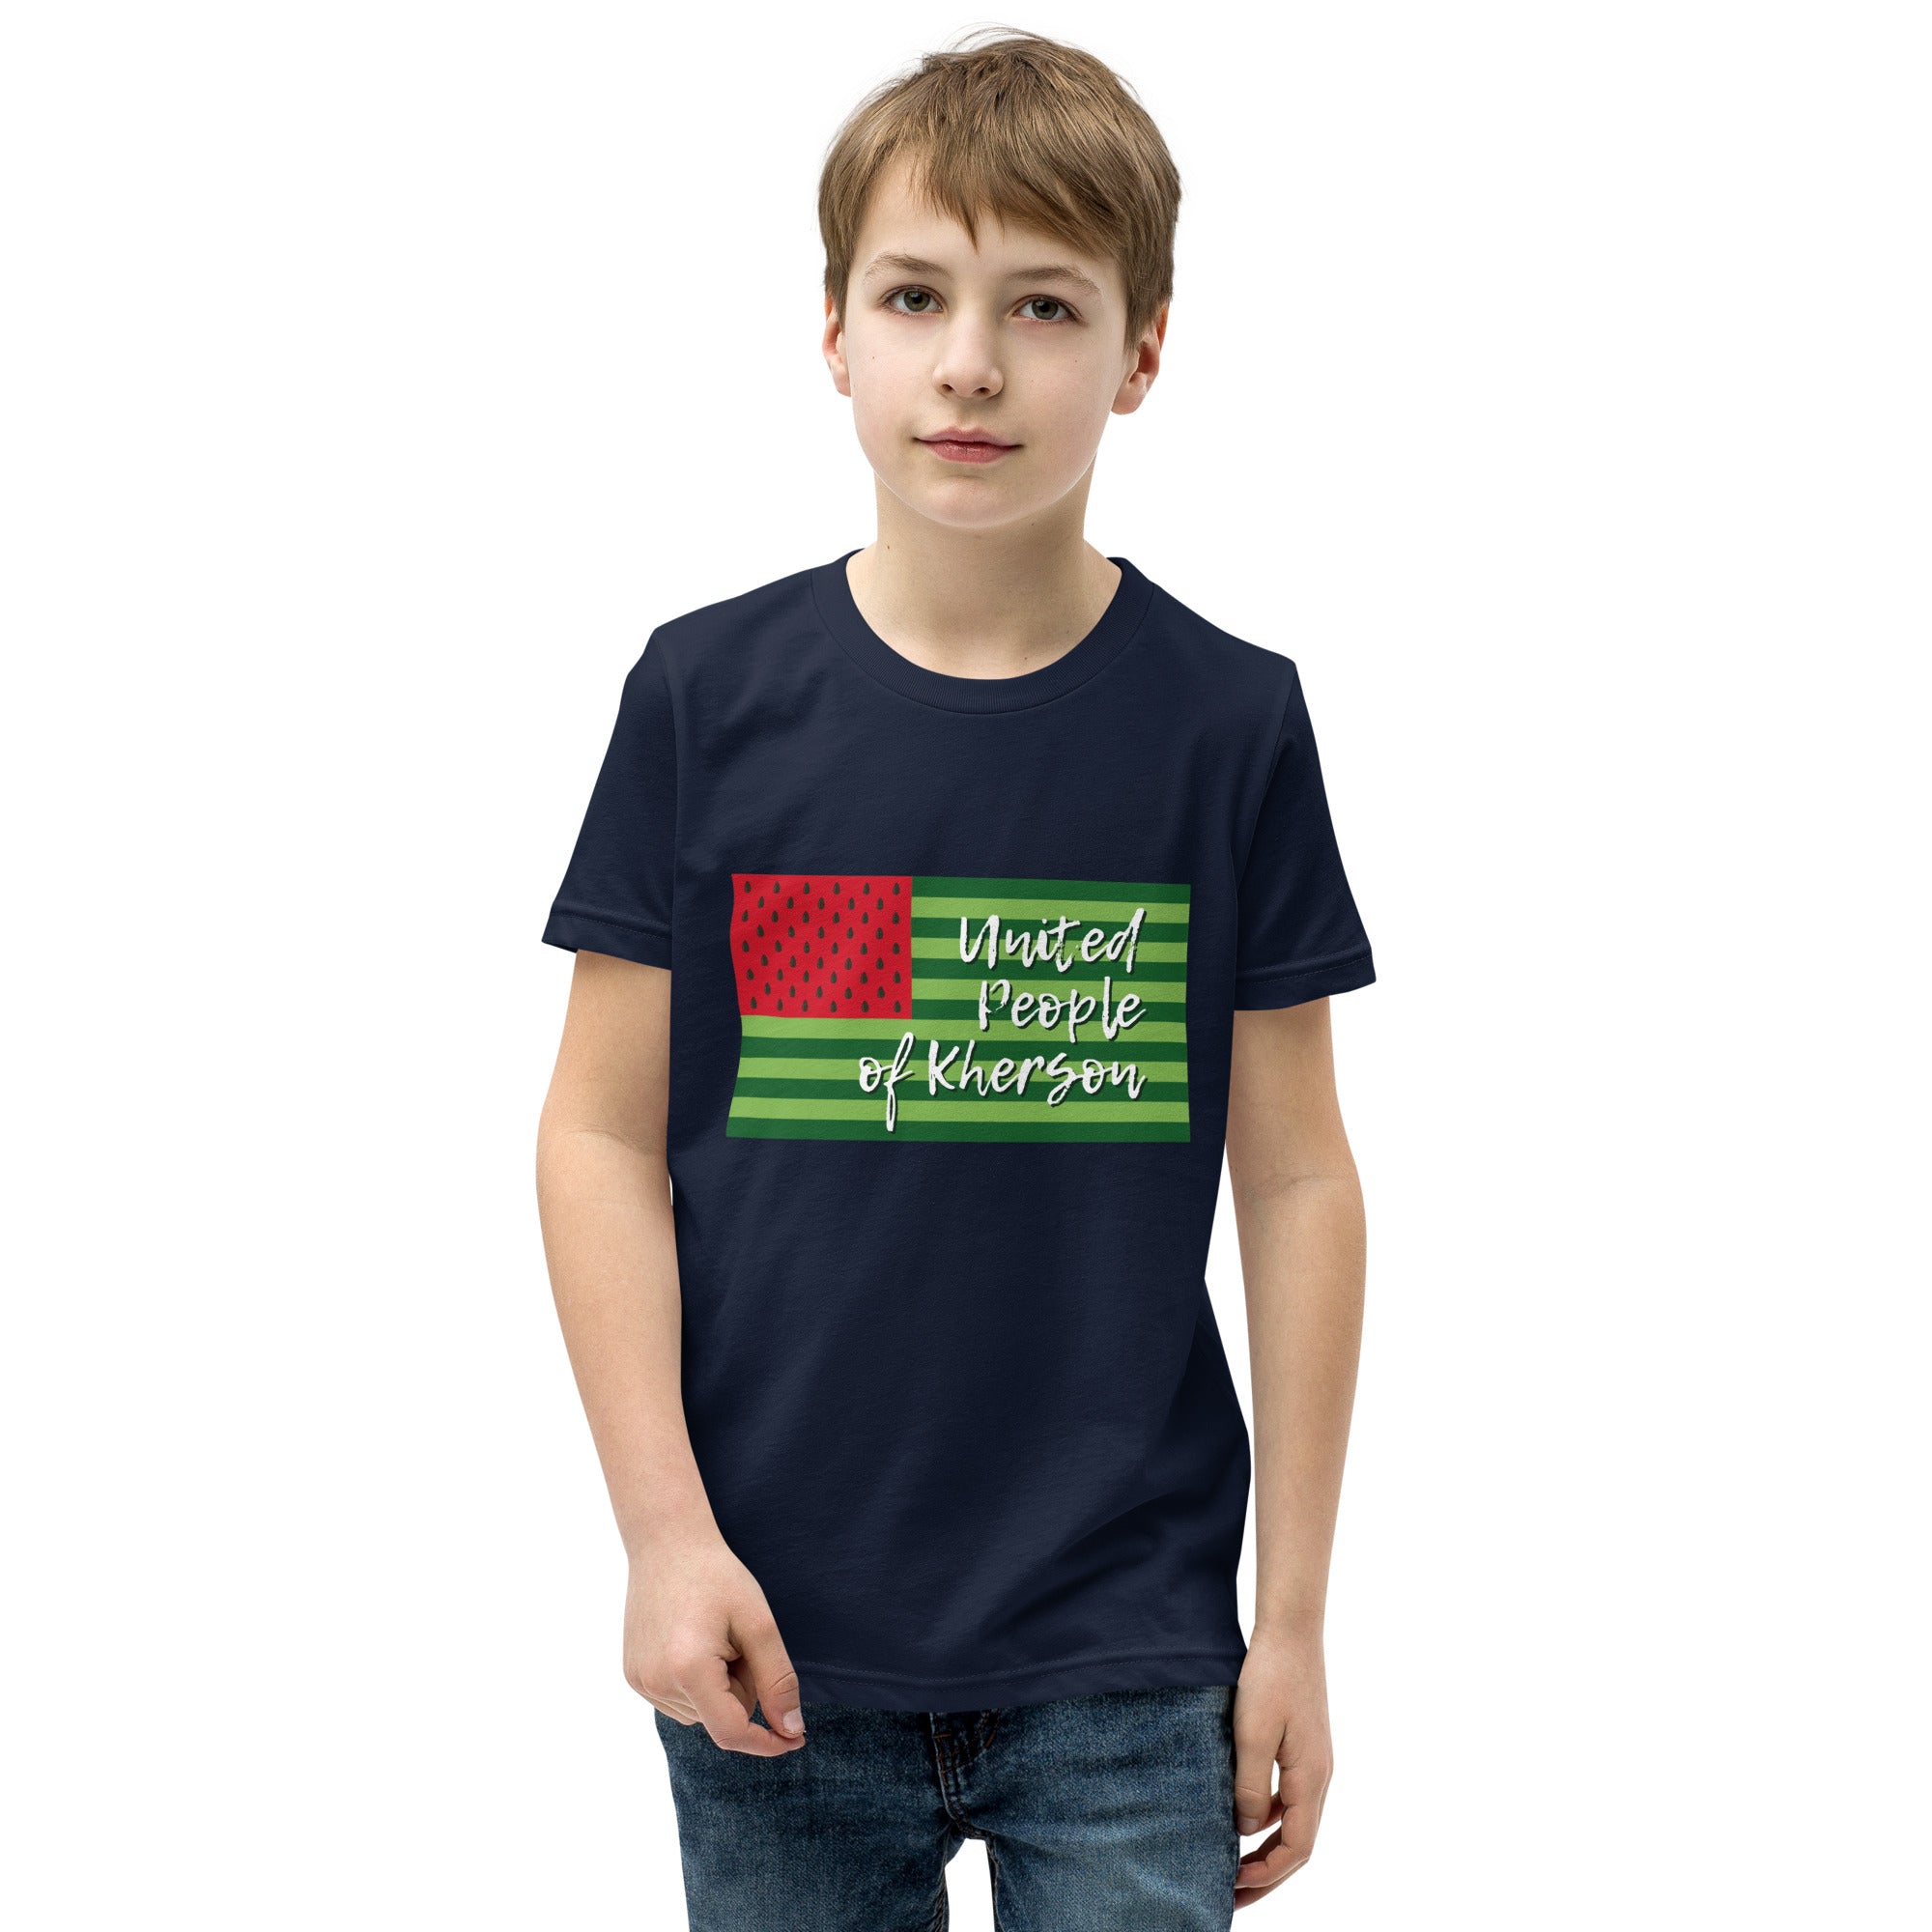 Youth Short Sleeve T-Shirt "United people of Kherson"